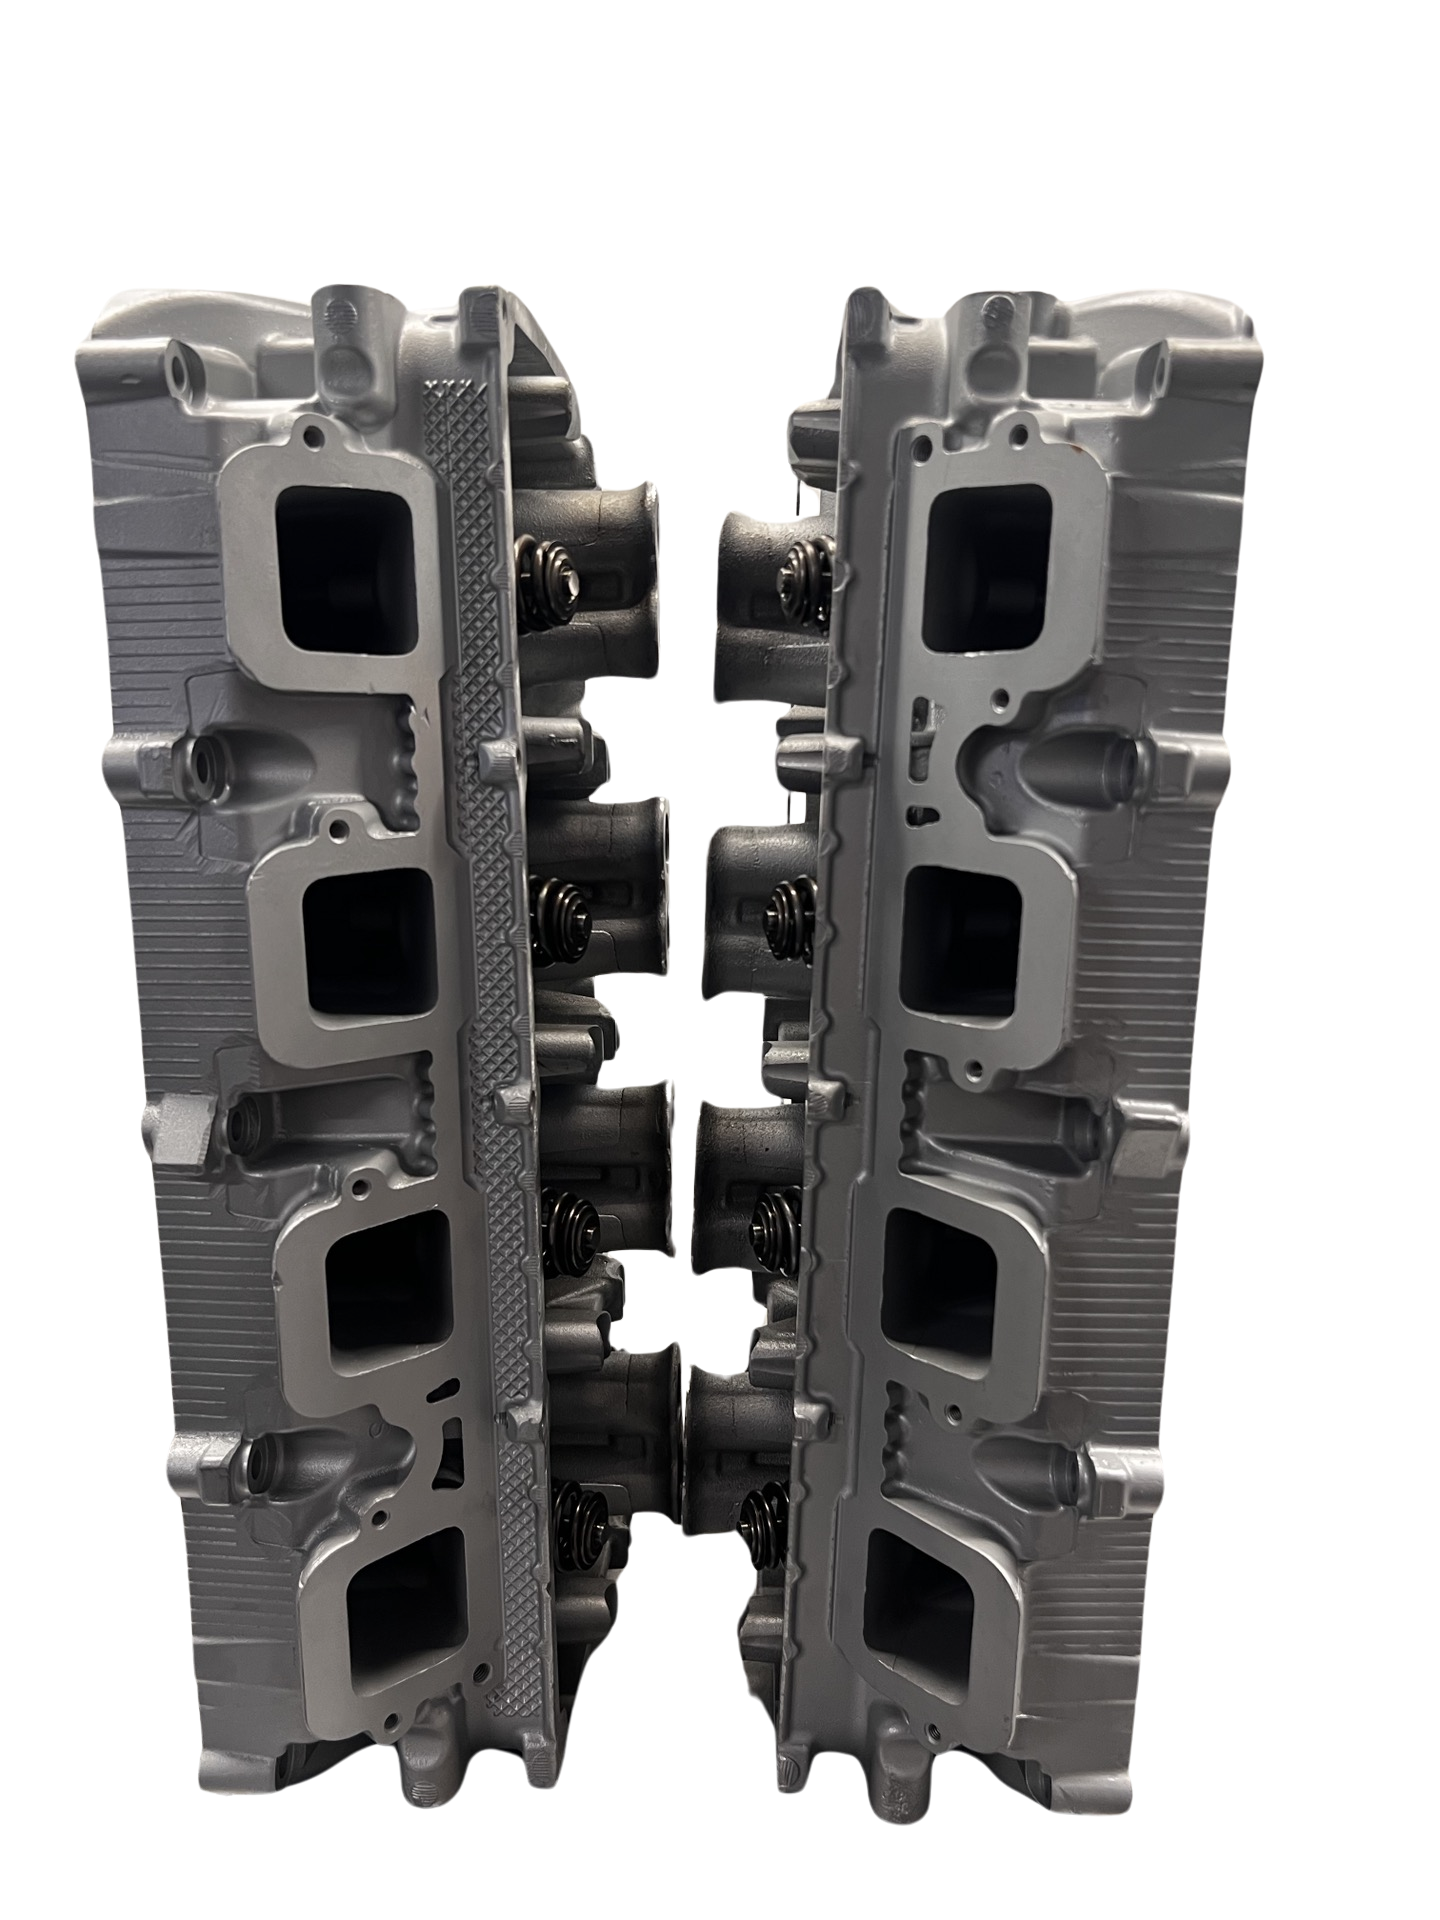 Exhaust side of cylinder heads Chrysler / DODGE Hemi 5.7L Casting #1616DF (SOLD IN PAIR)